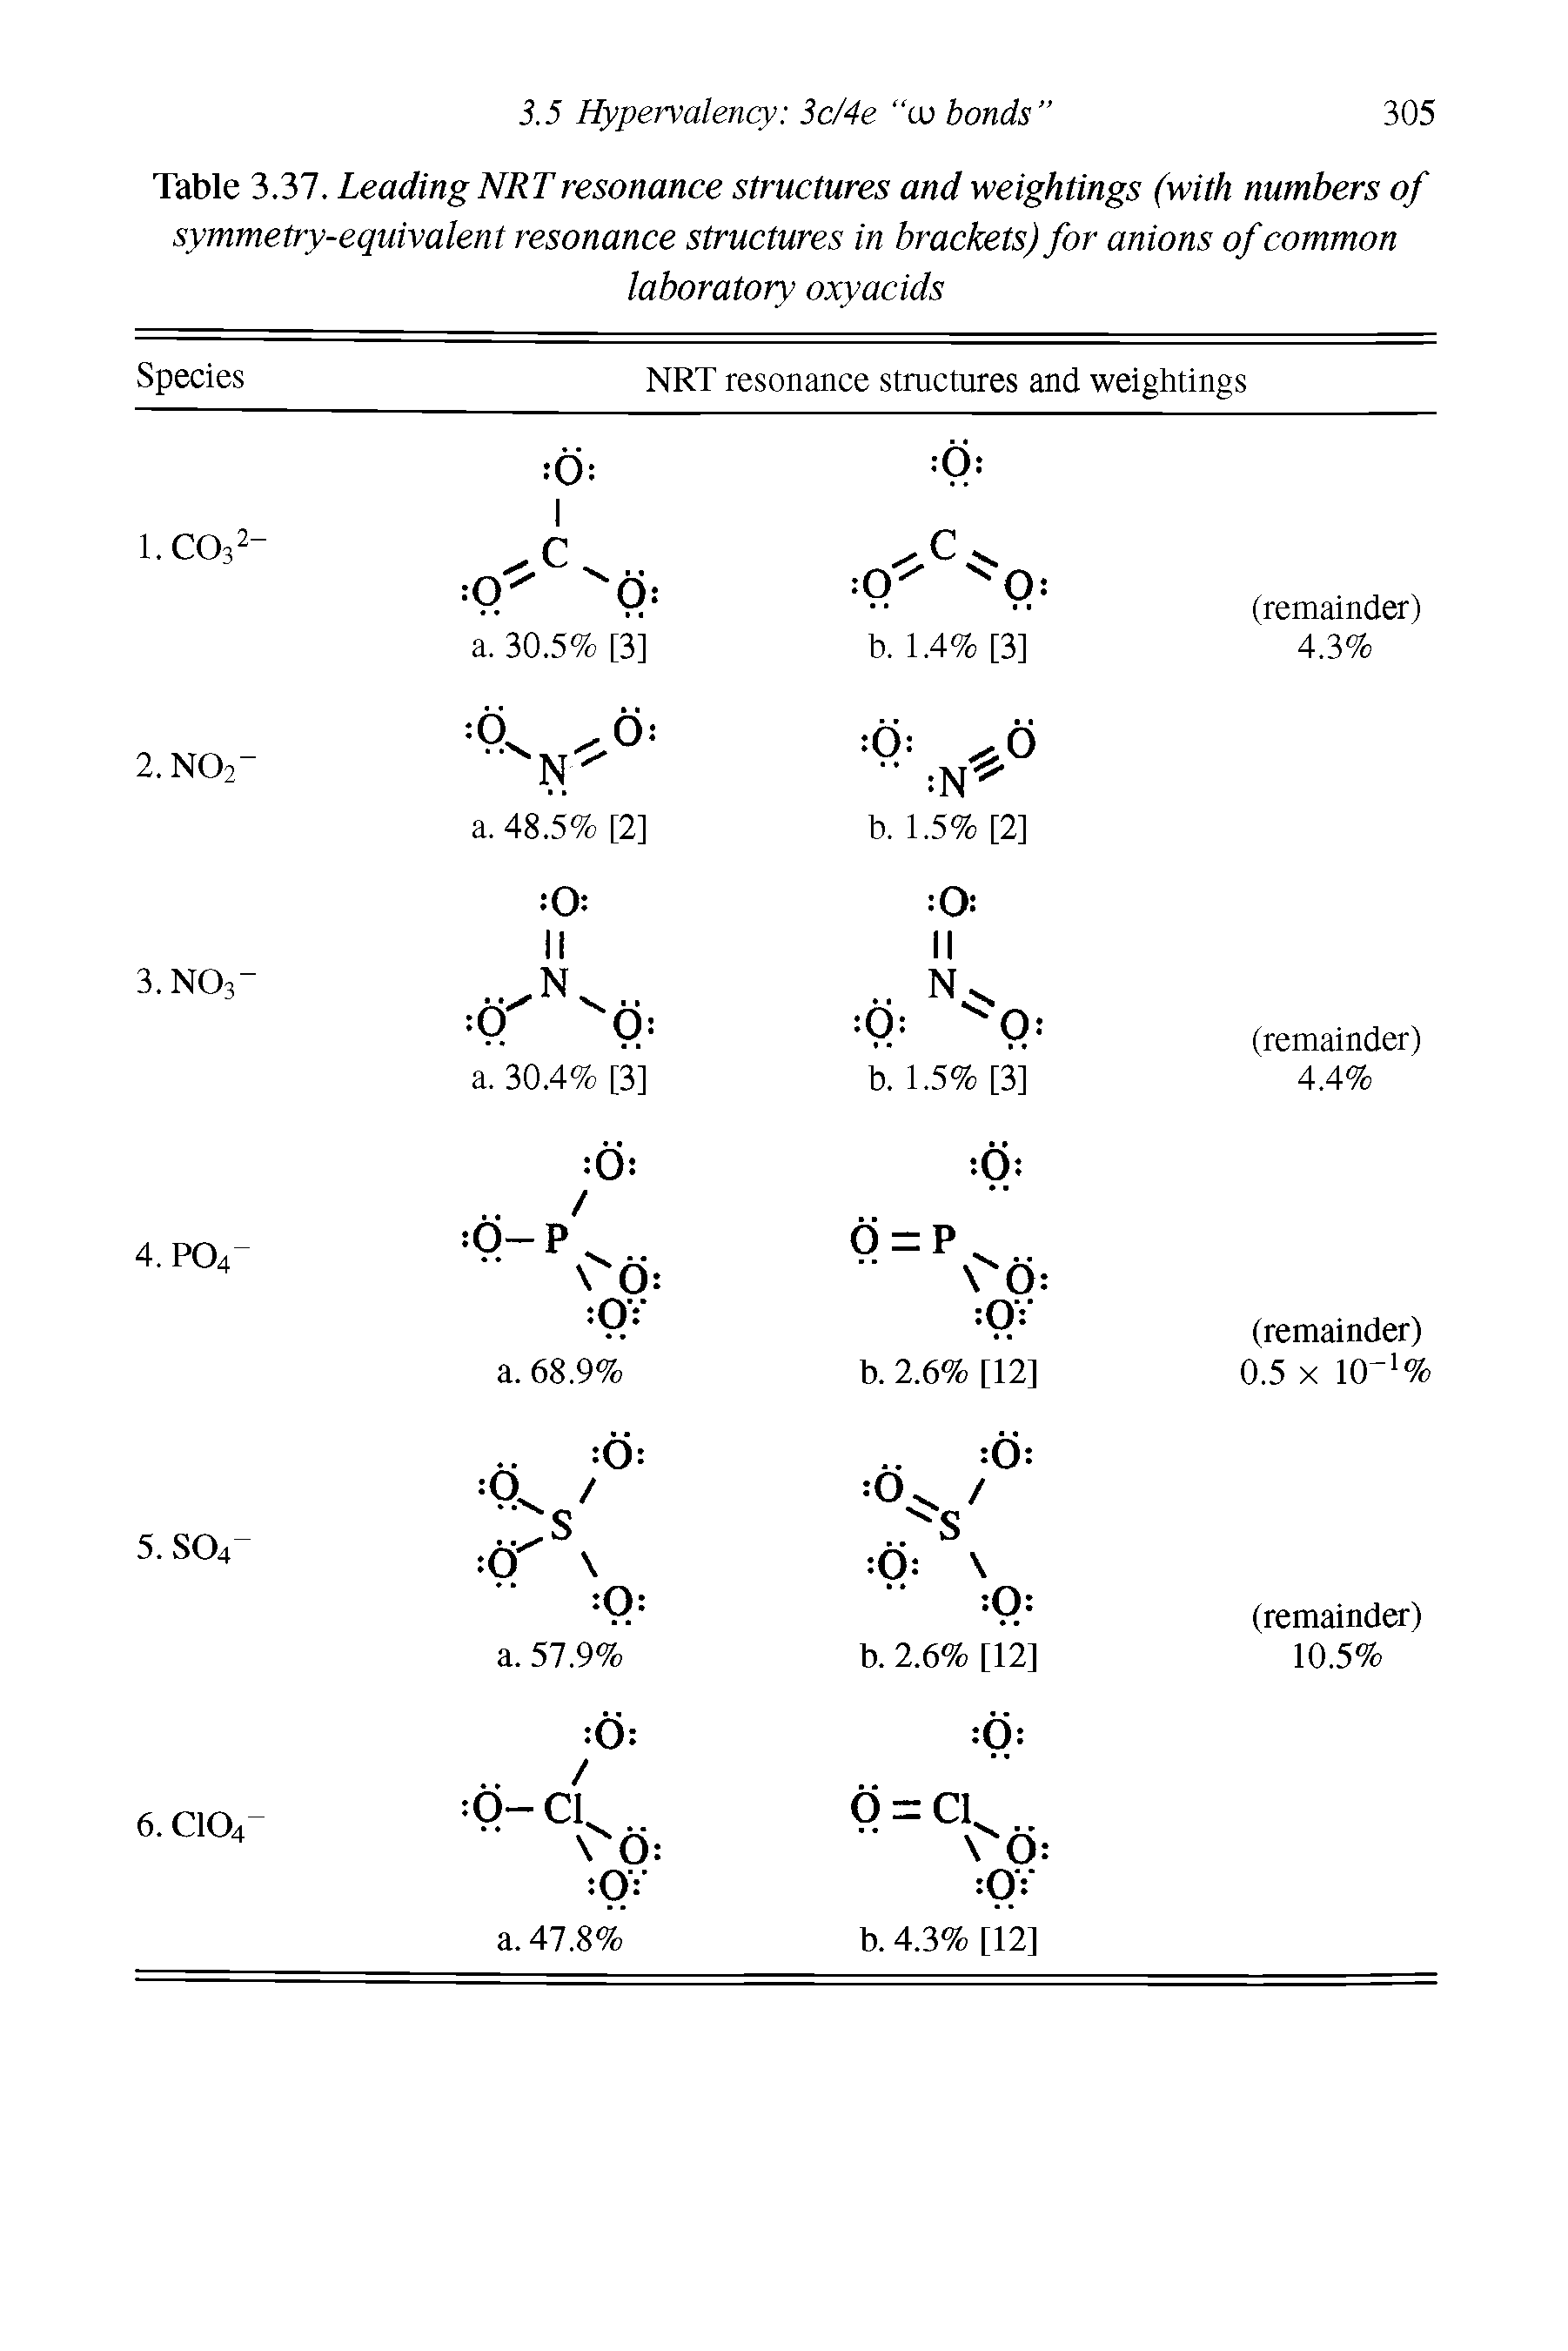 Table 3.37. Leading NRTresonance structures and weightings (with numbers of symmetry-equivalent resonance structures in brackets) for anions of common...